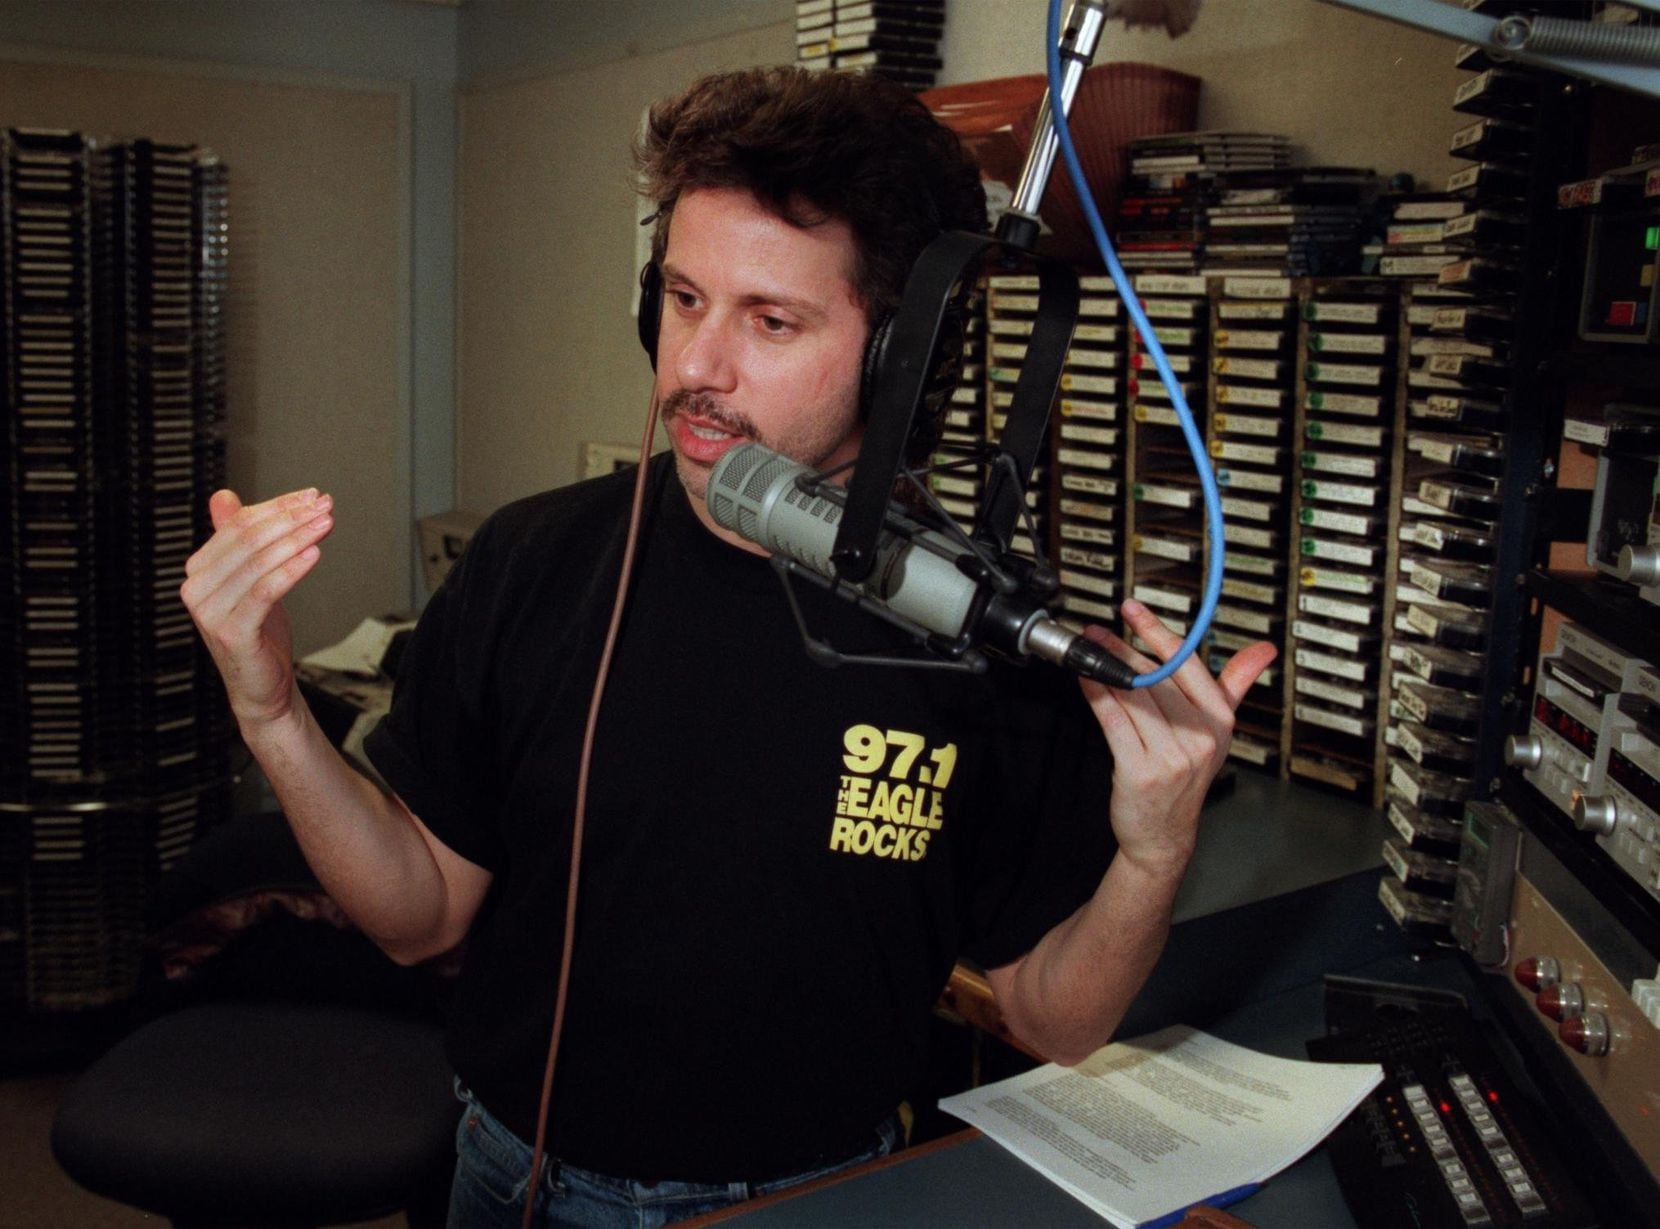 Russ Martin is seen during his show on “The Eagle” KEGL-FM (97.1) in a 2003 file photo.